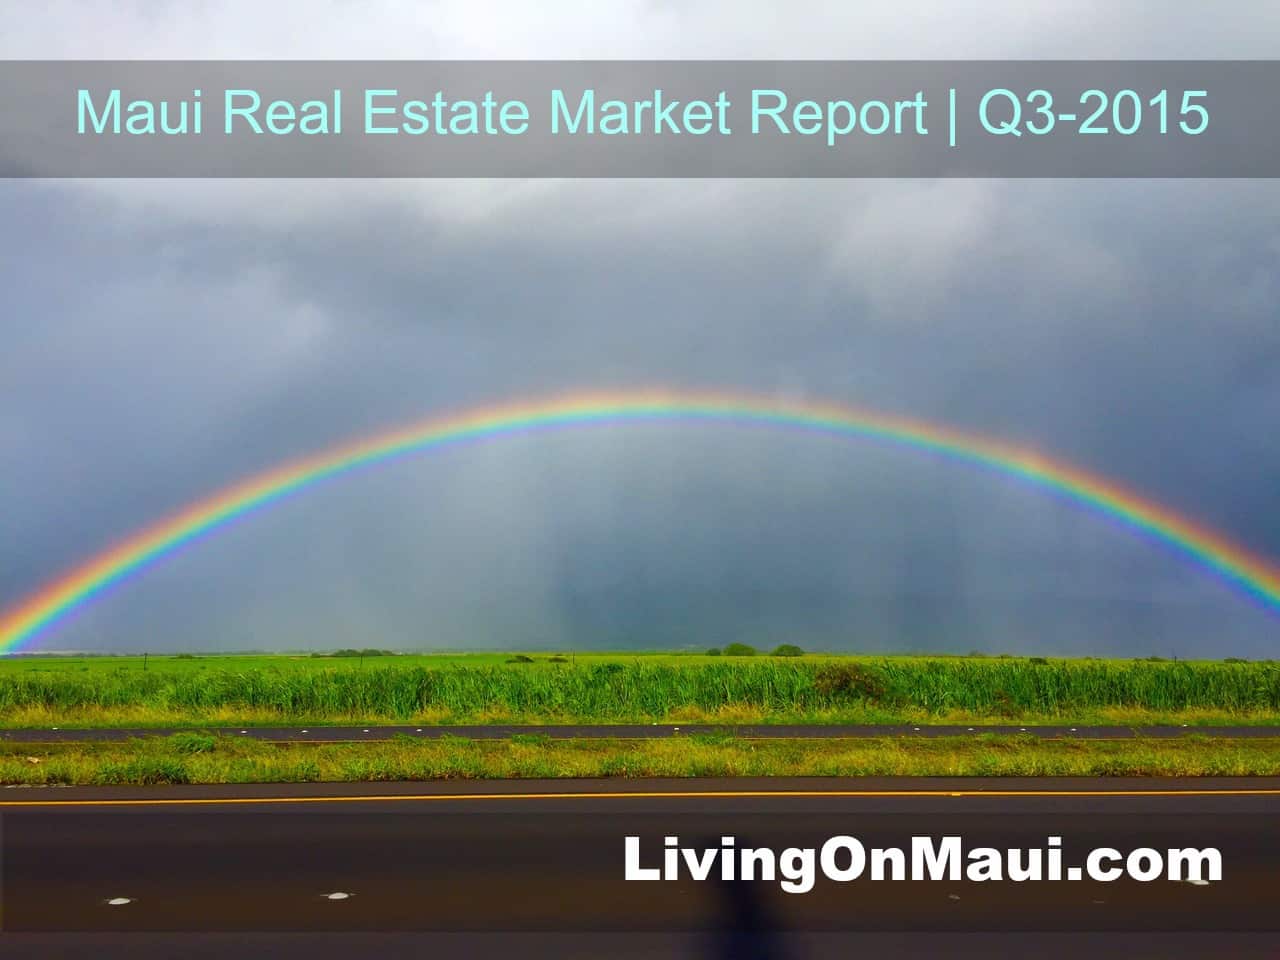 Maui real estate market report September 2015 and year to date 2015